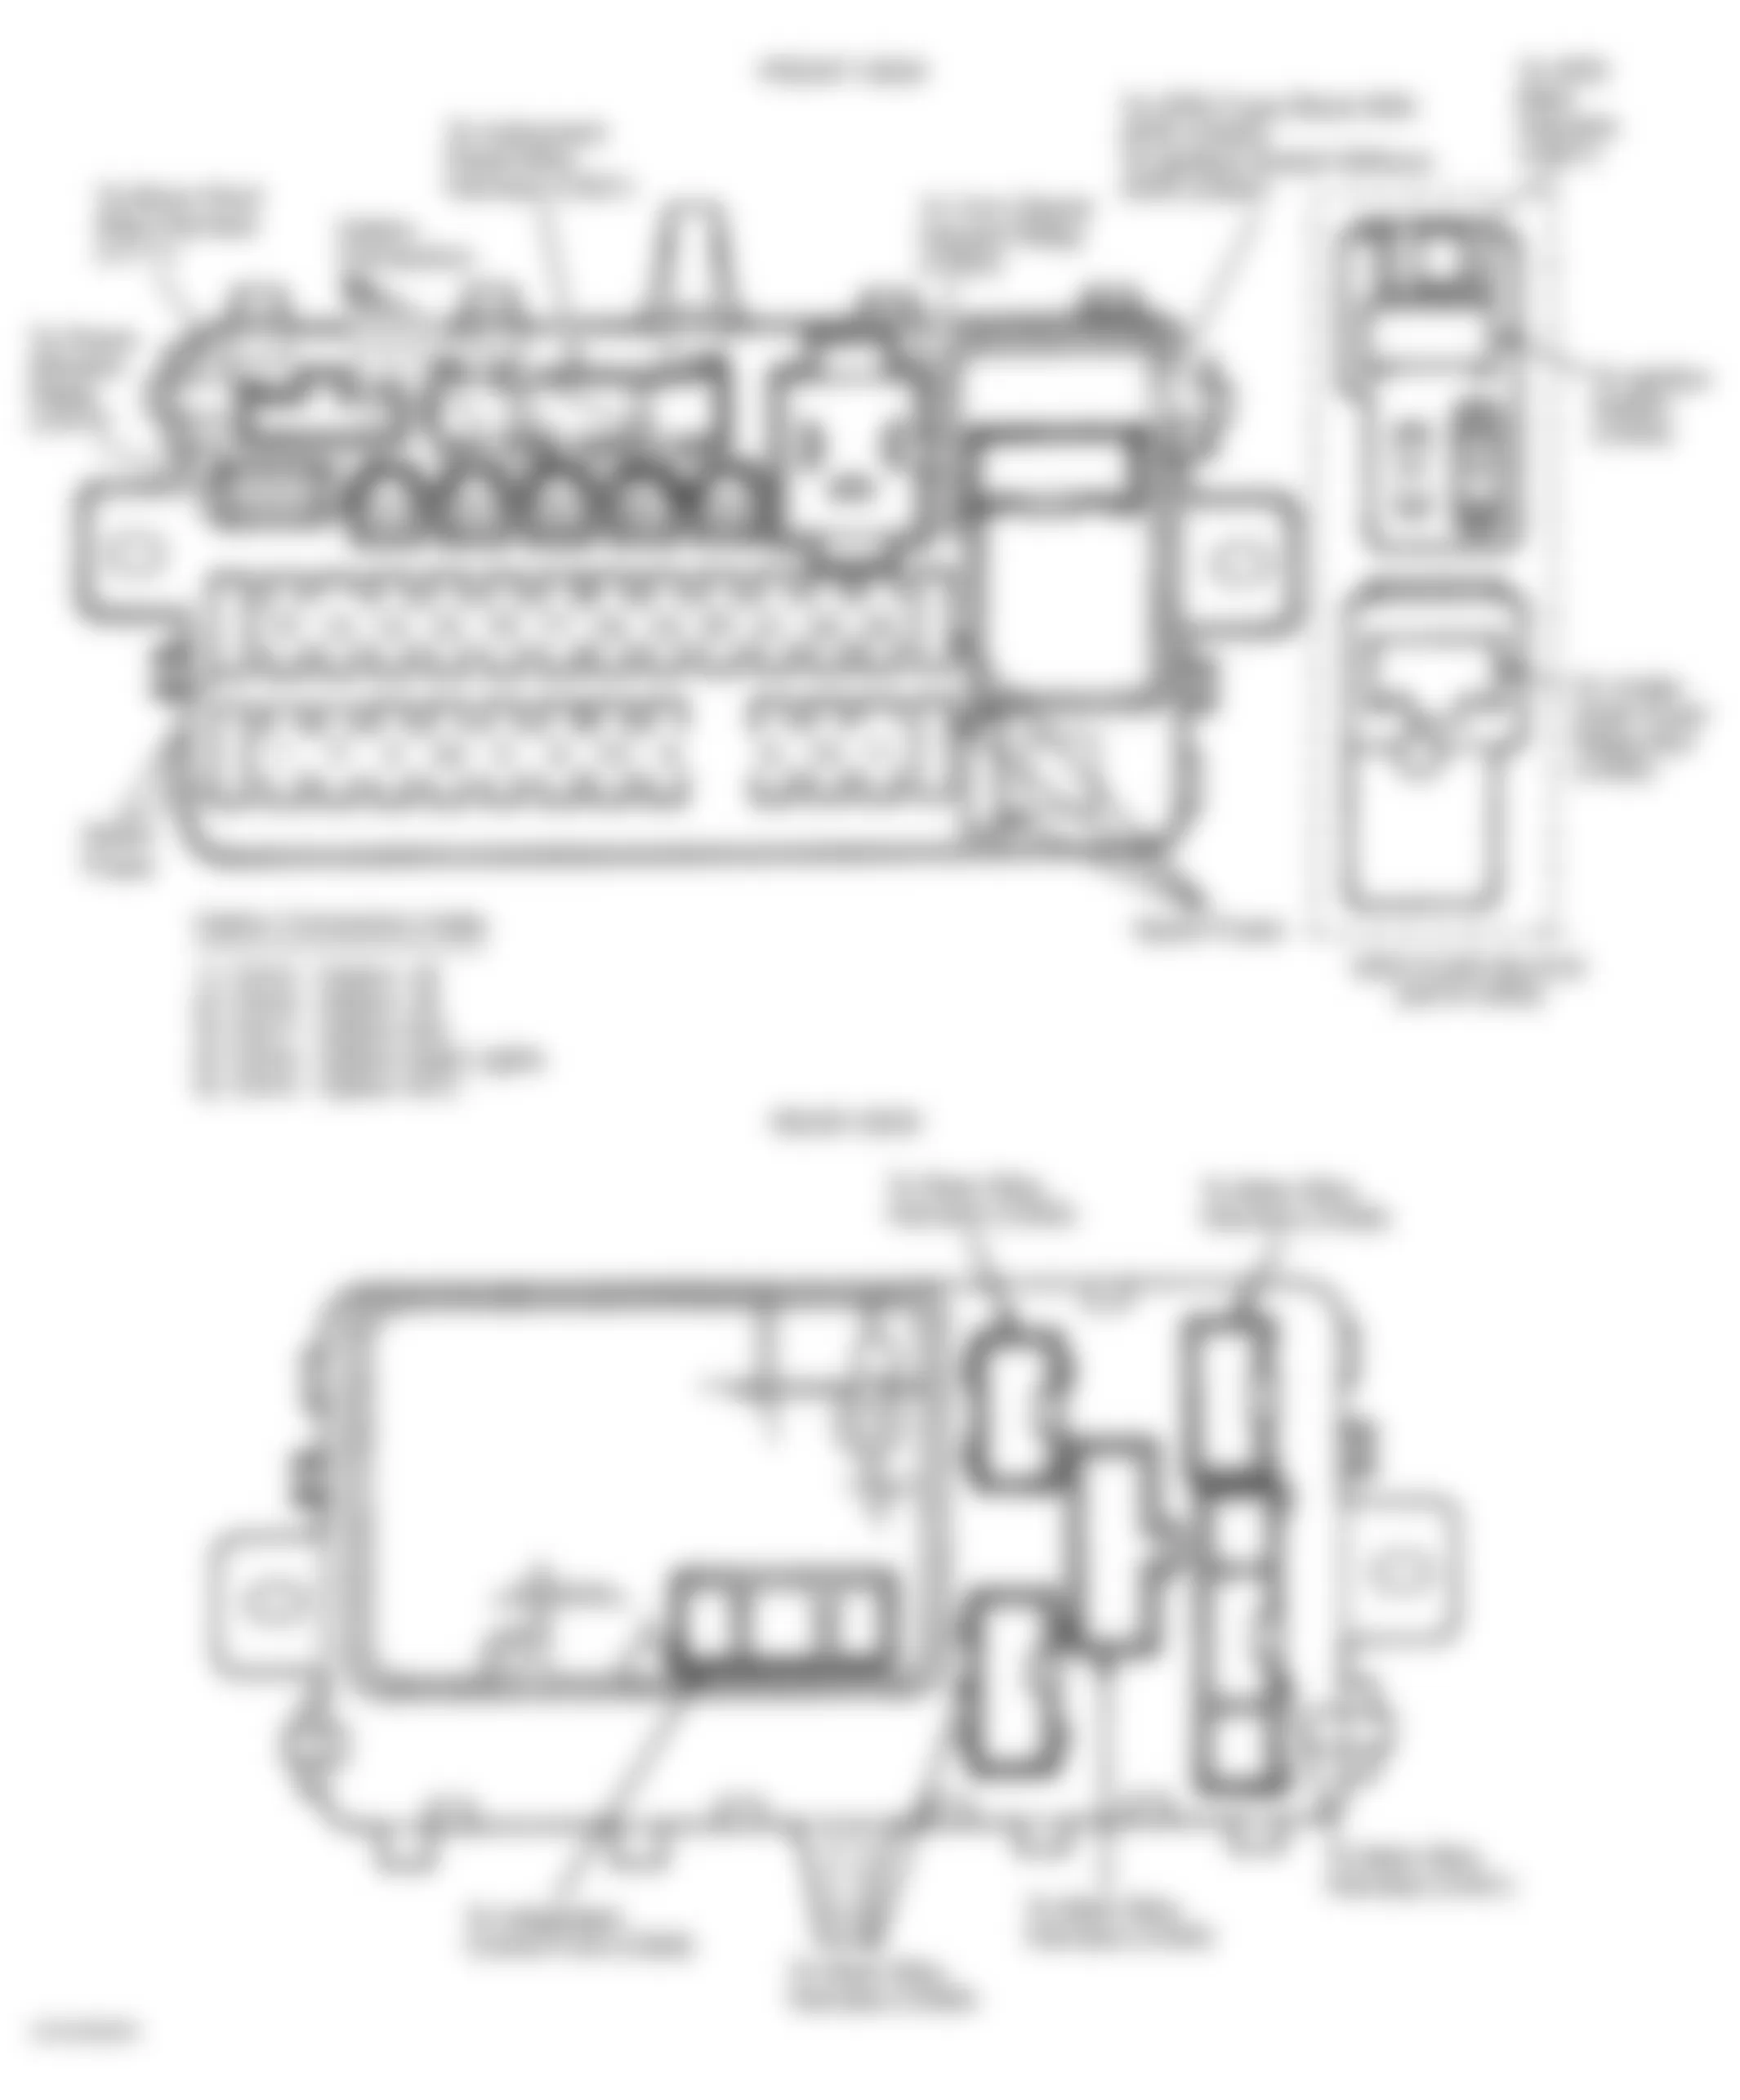 Honda Civic LX 1995 - Component Locations -  Identifying Under-Dash Fuse/Relay Box Components (1994-95 Civic)